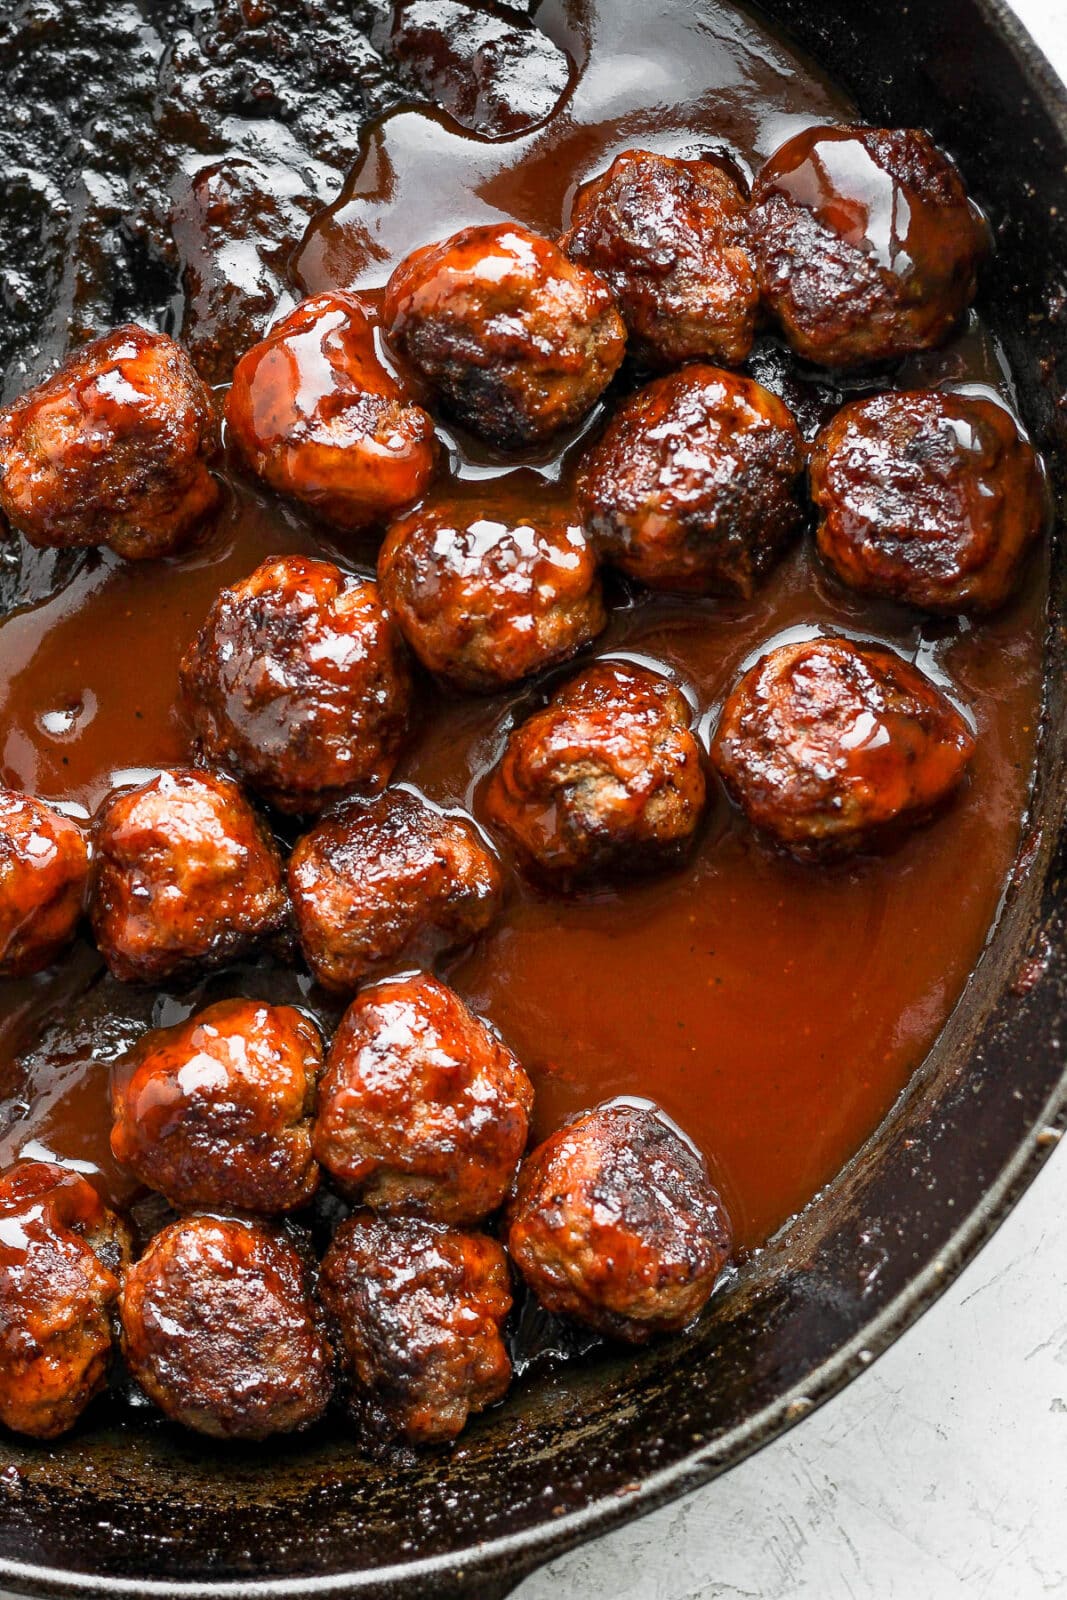 Cast iron skillet with cooked meatballs and BBQ sauce.